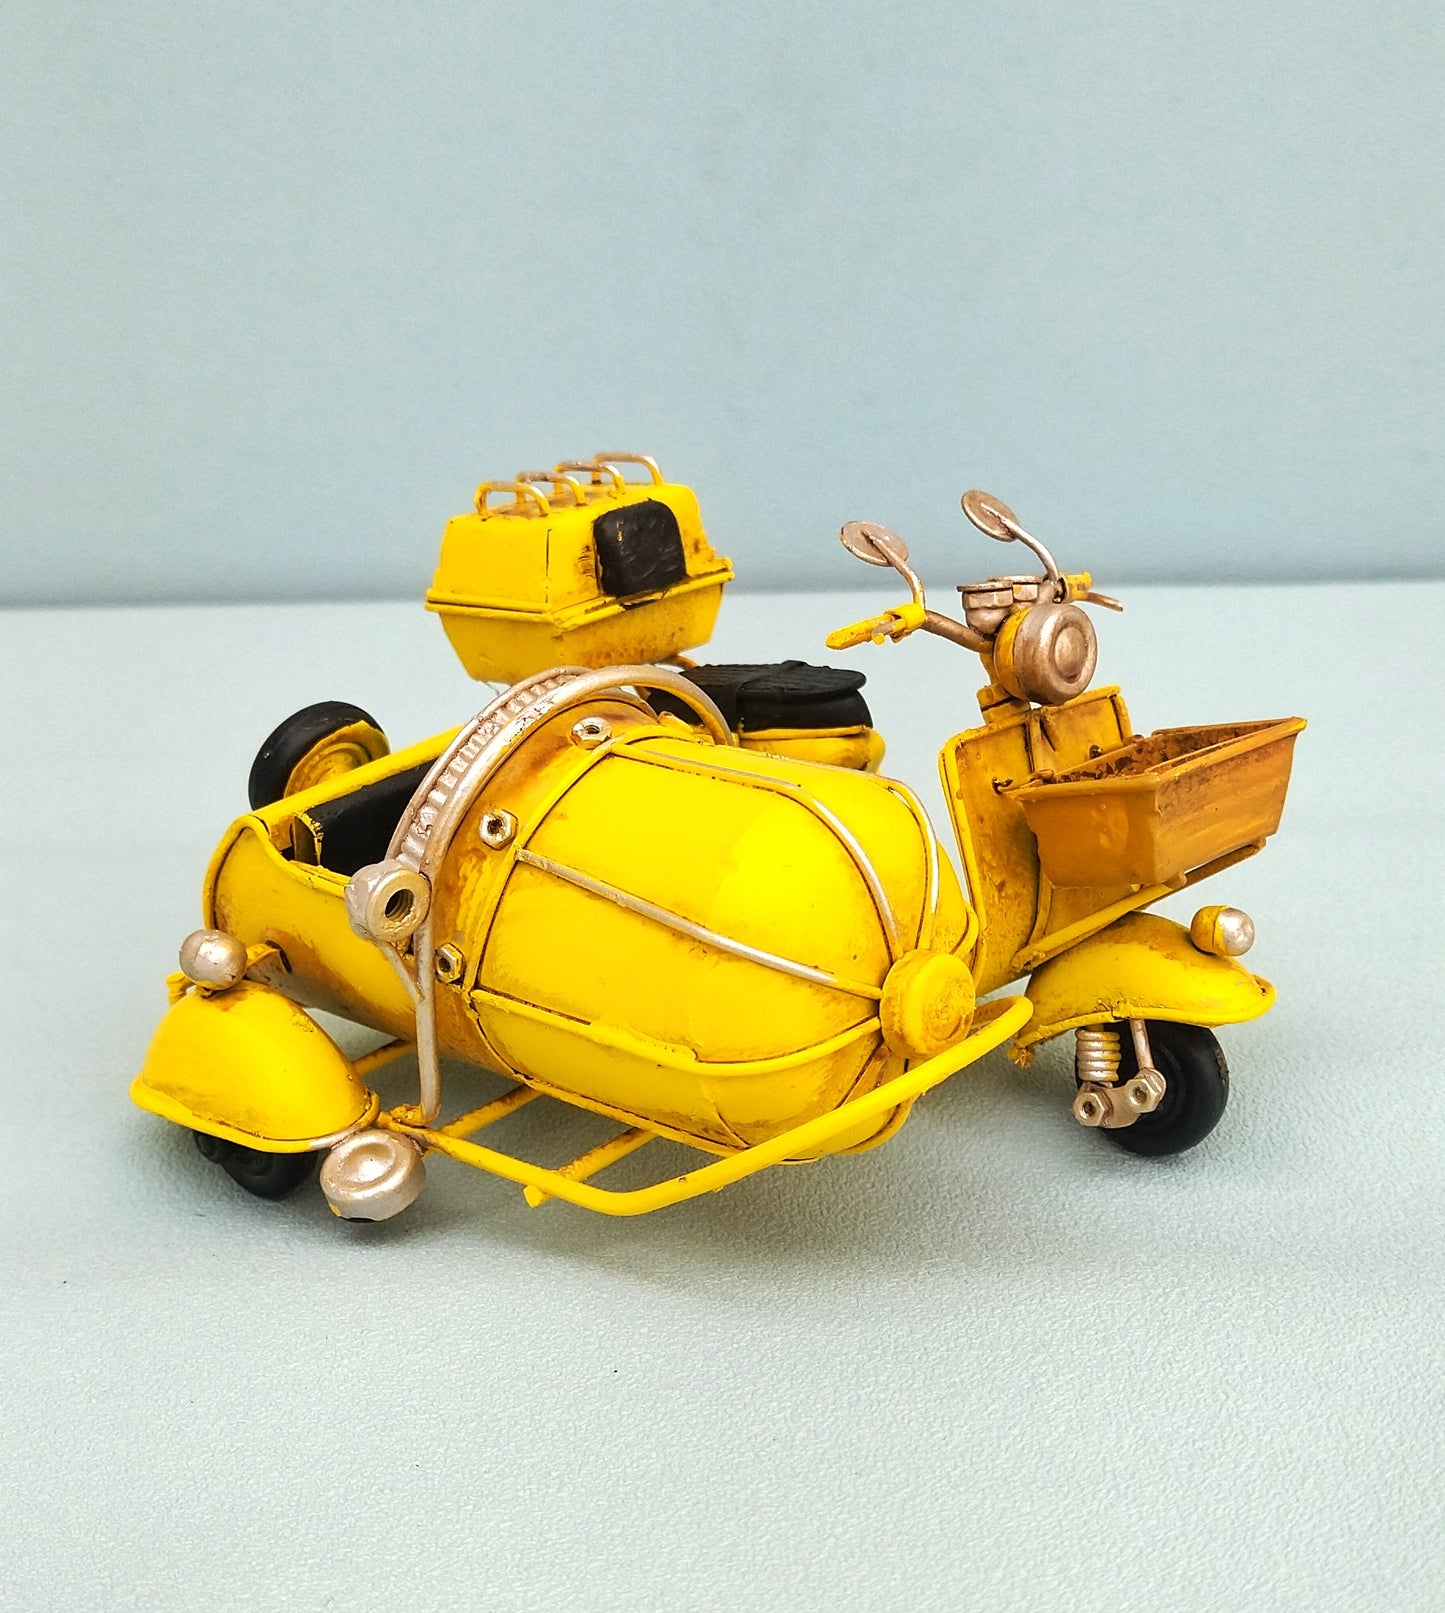 Yellow Motorcycle With Sidecar